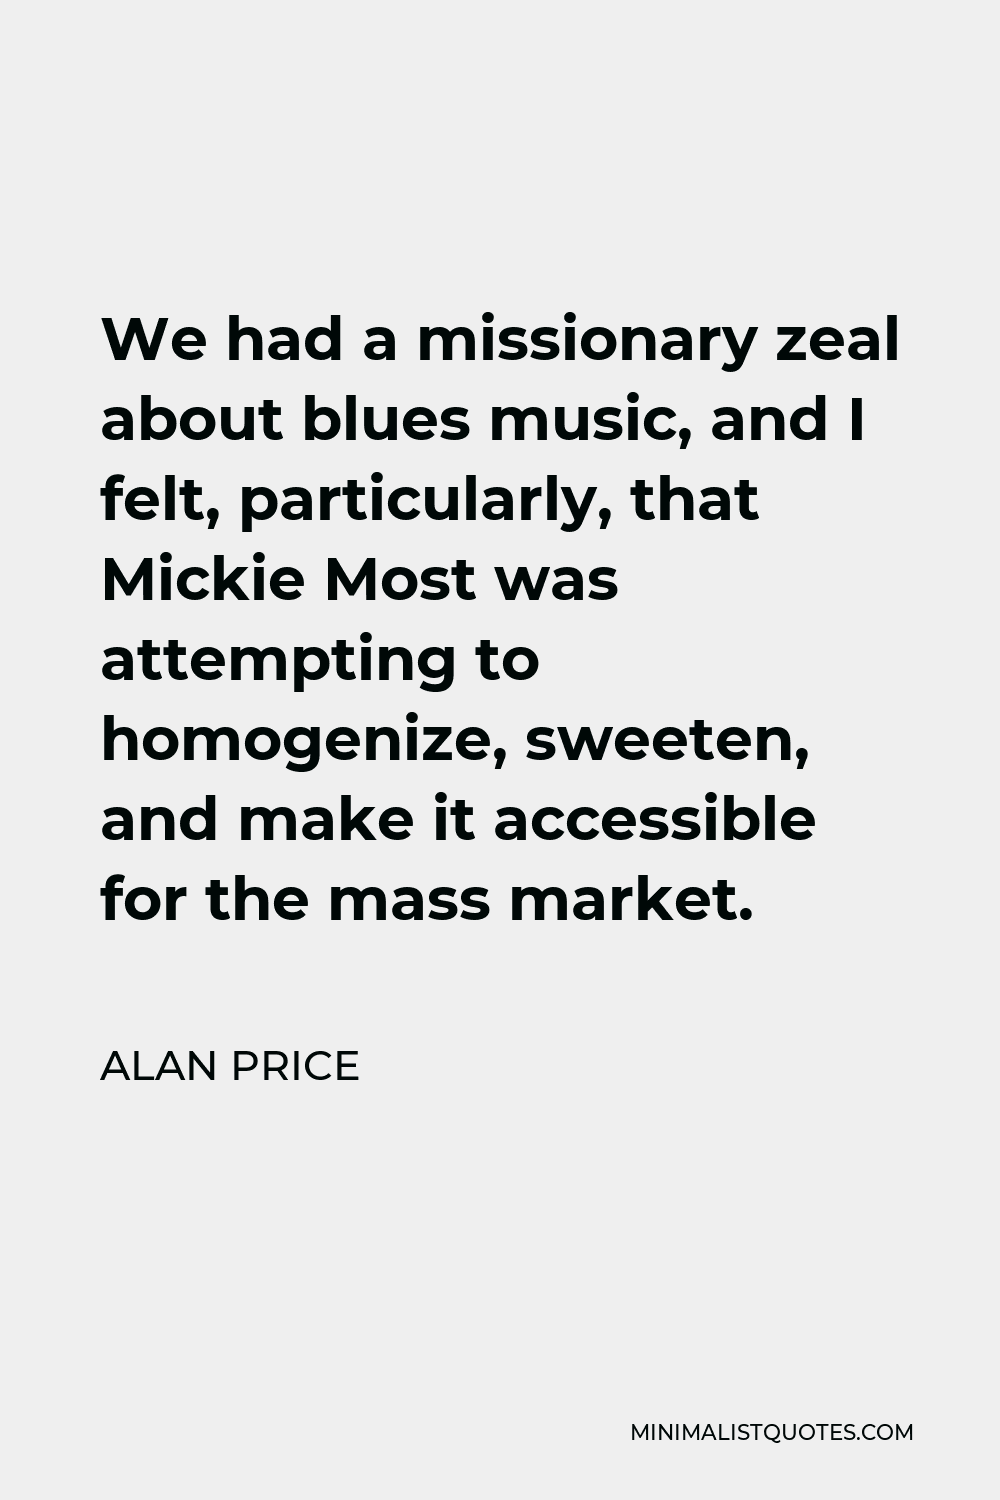 Alan Price Quote - We had a missionary zeal about blues music, and I felt, particularly, that Mickie Most was attempting to homogenize, sweeten, and make it accessible for the mass market.